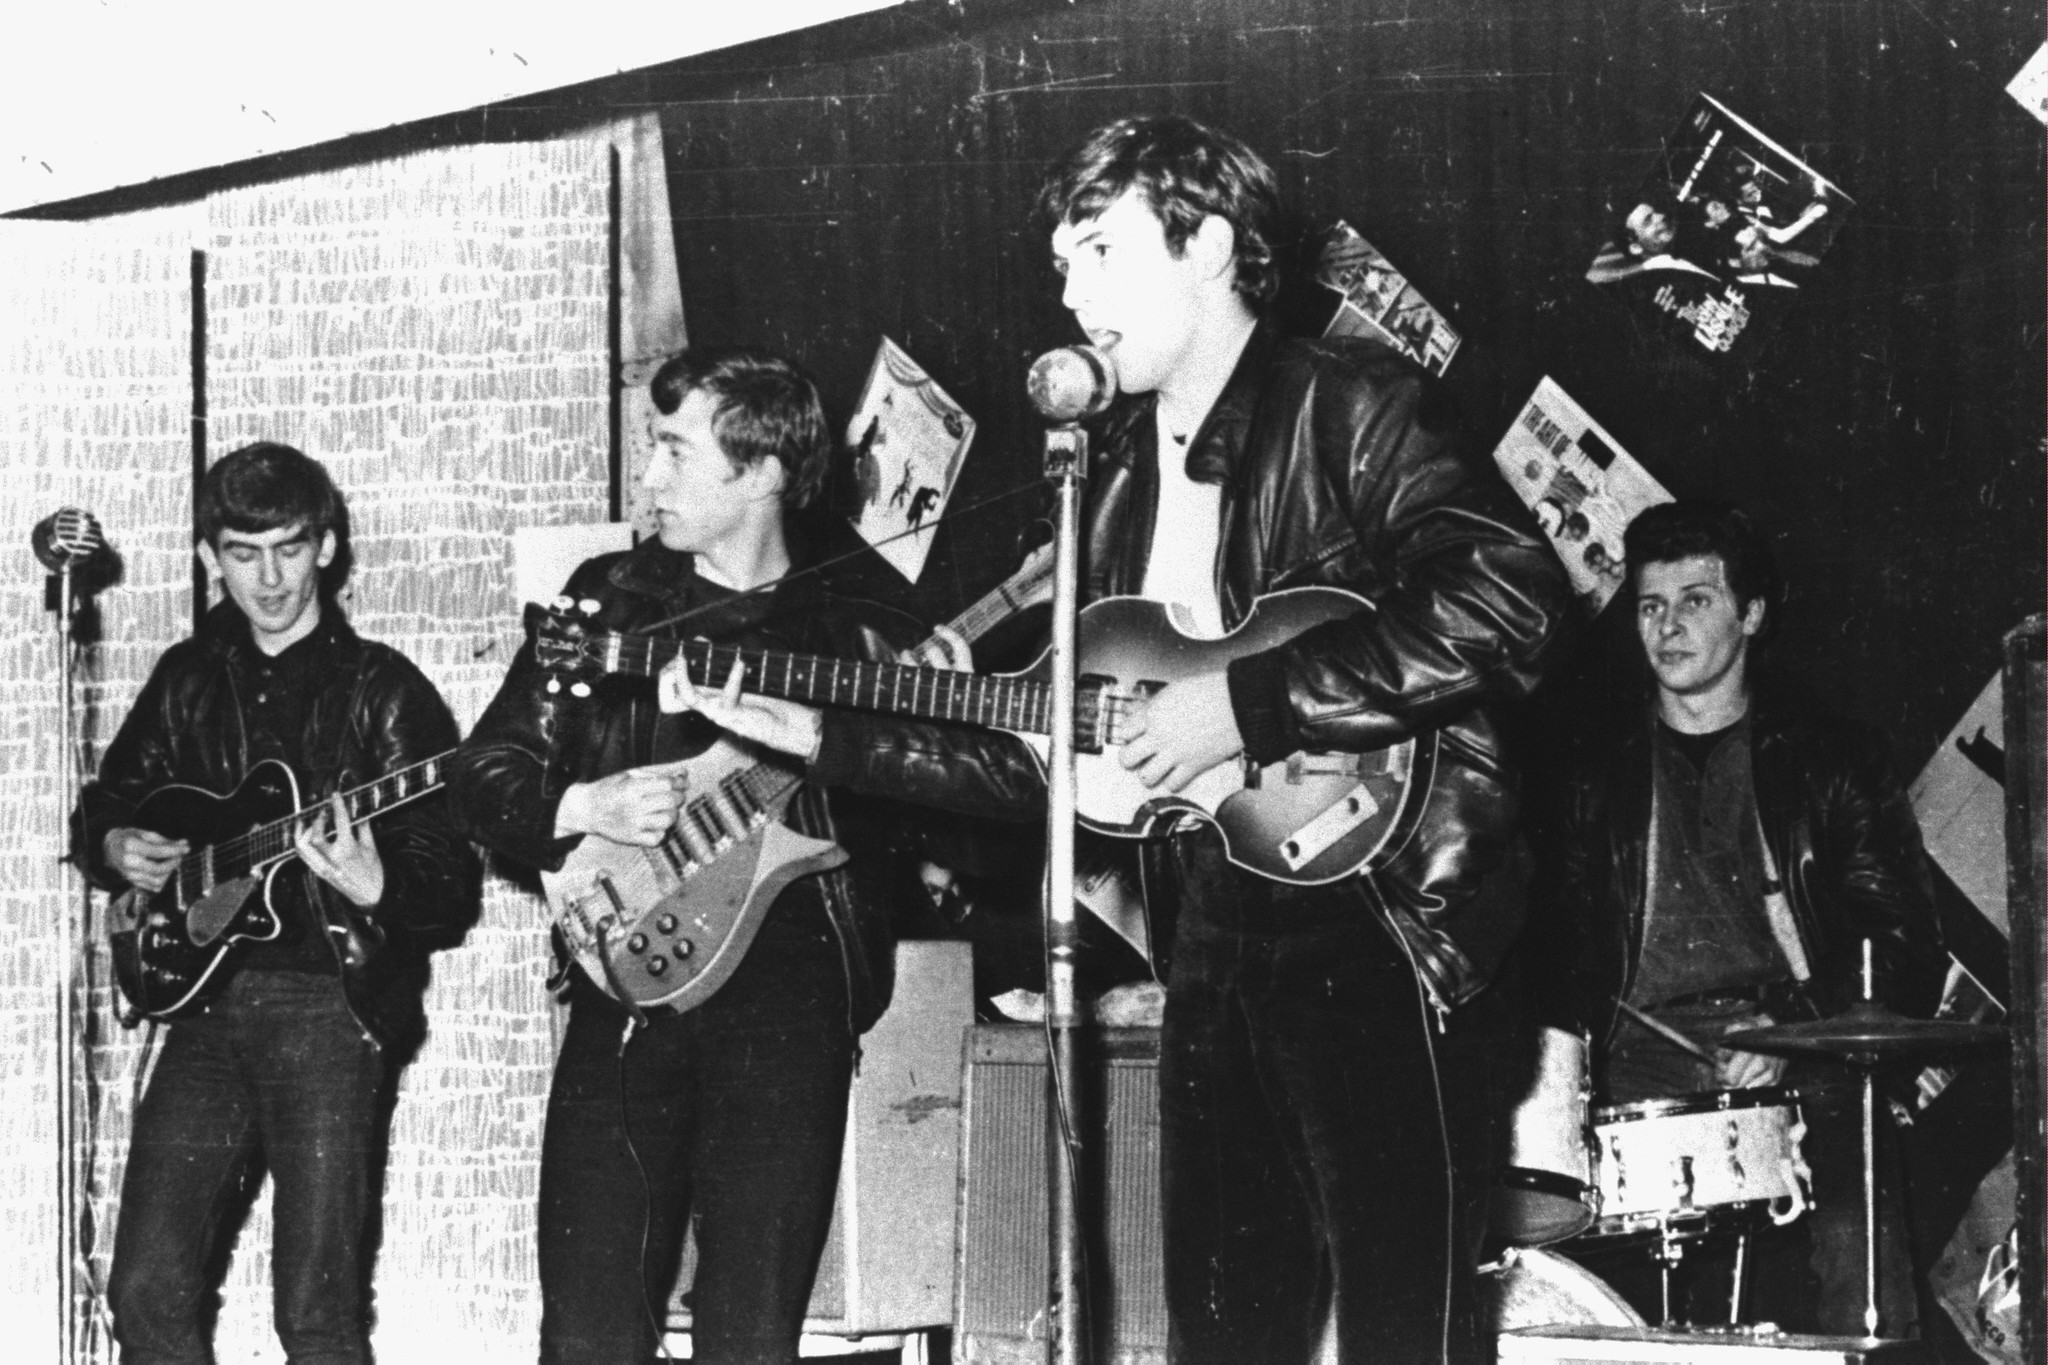 Prior to Ringo Starr joining The Beatles, the group consisted of (l-r) George Harrison, John Lennon, Paul McCartney, and original drummer Pete Best, all here in a club prior to signing their first recording contract in Liverpool, England in 1962. Best was cut from the group and Starr replaced him that same year.